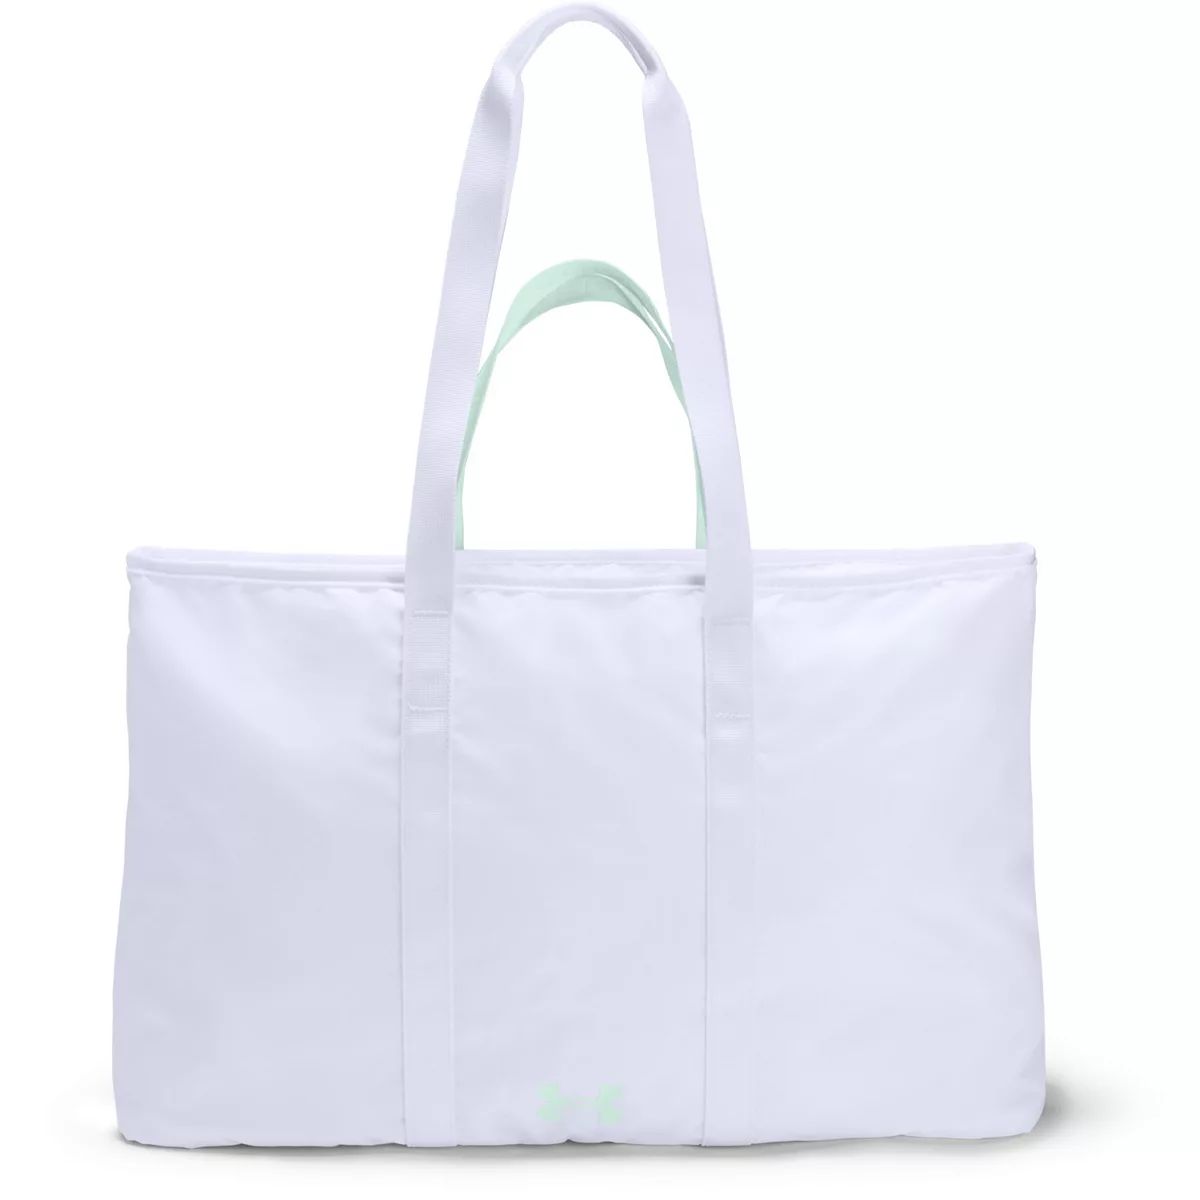 Under Armour Favorite 2.0 Tote Bag | Kohl's